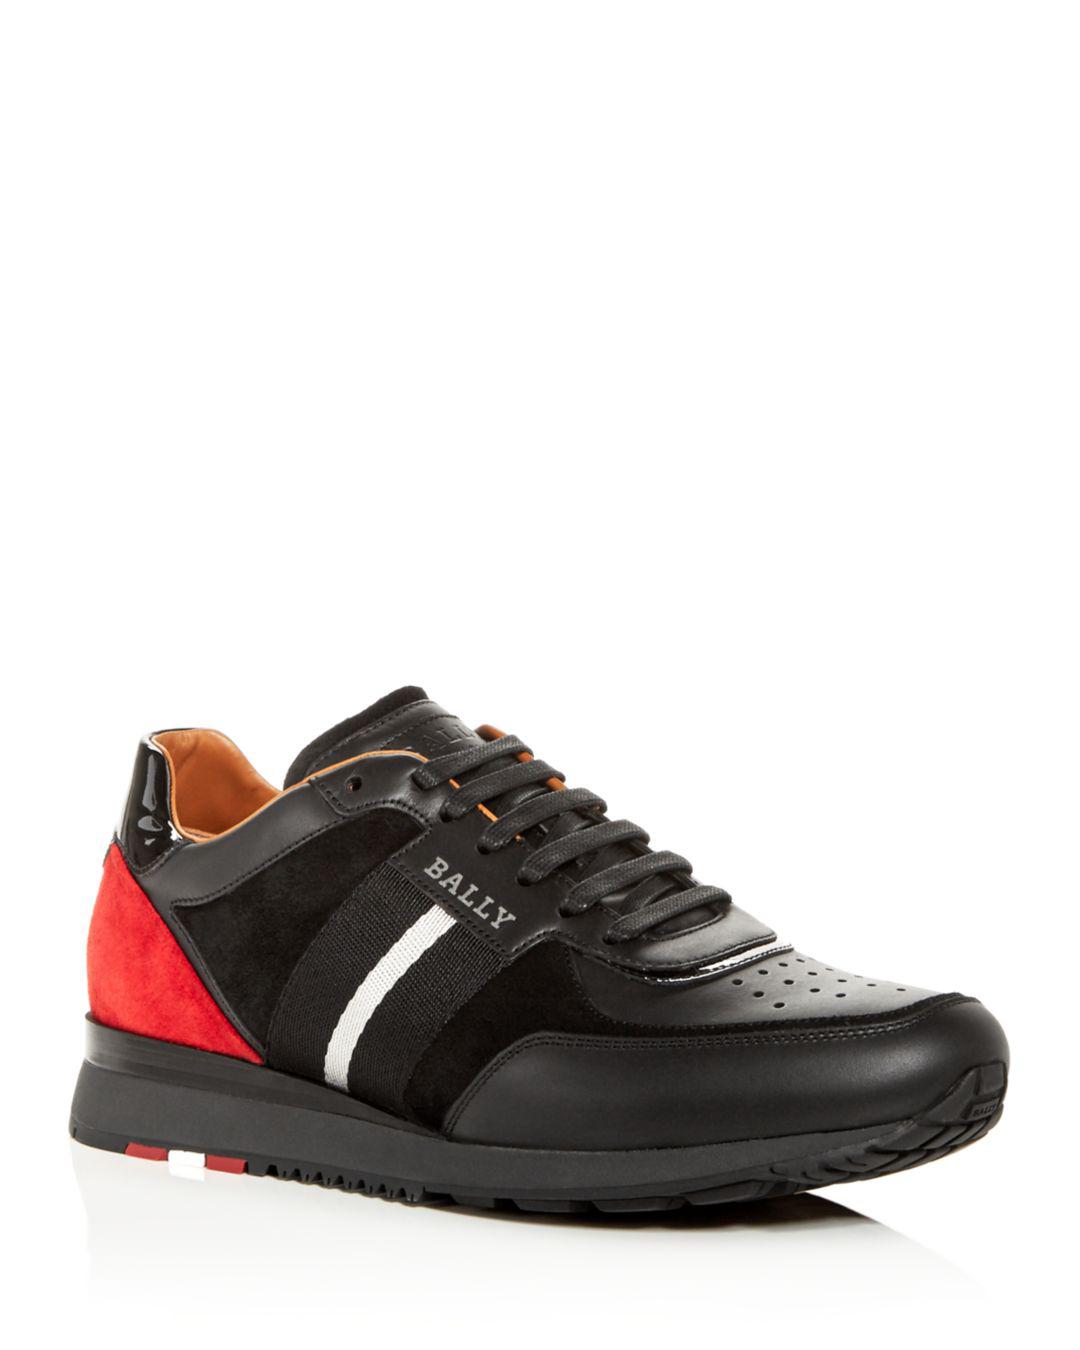 Bally Leather Lace-up Logo Sneakers in Black for Men - Lyst